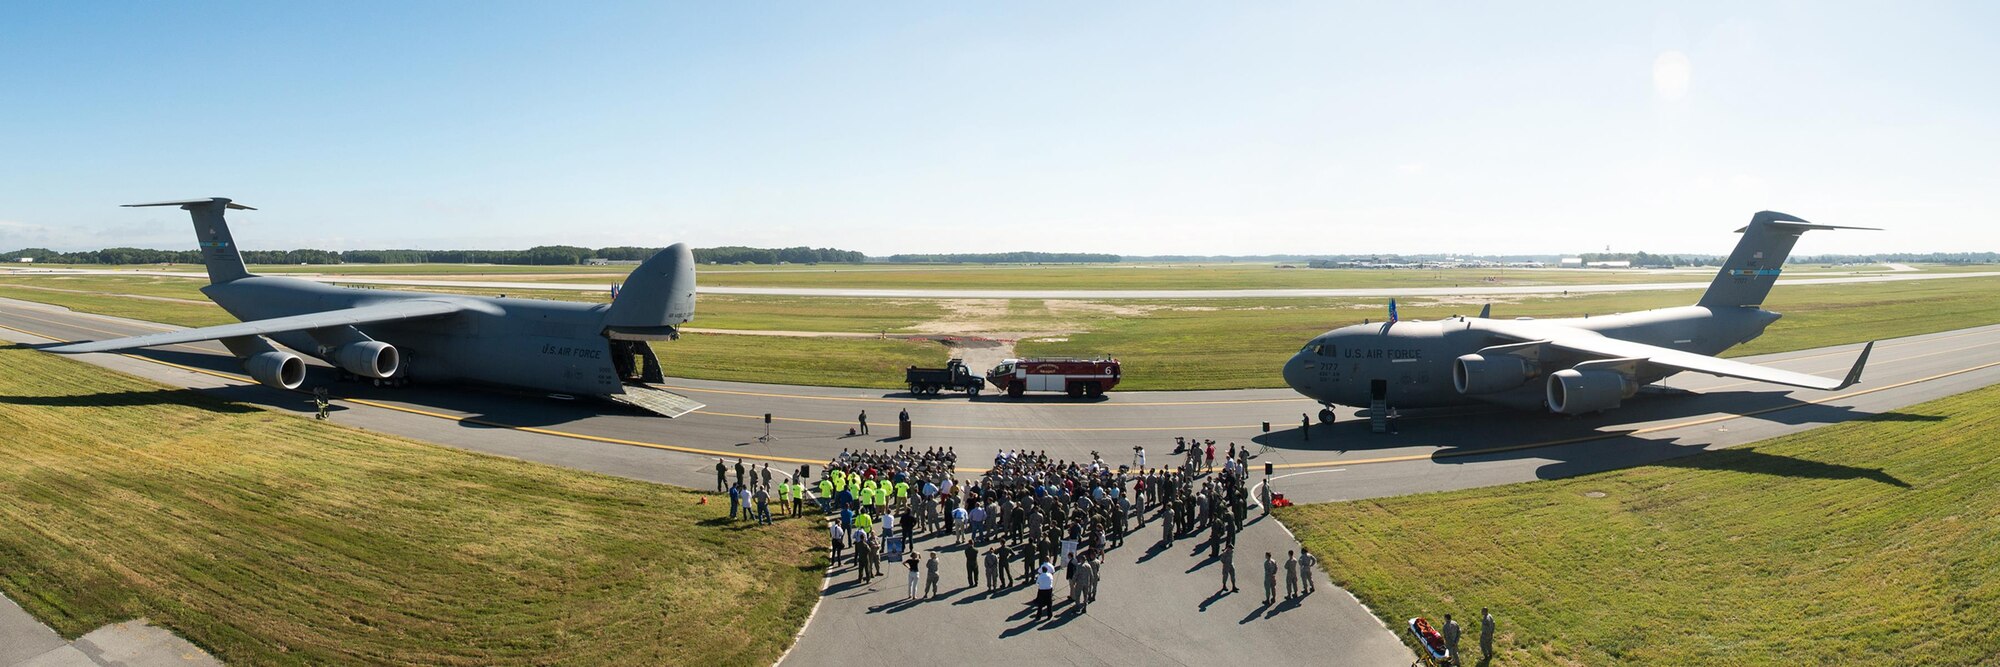 Team Dover gathers during a ribbon cutting ceremony that reopened Runway 01-19, Sept. 23, 2016, at Dover Air Force Base, Del. More than 200 Team Dover members attended the event. Those in attendance included several U.S. senators, local government members and members of the 436th Airlift Wing, 512th AW, 166th AW and Joint Base McGuire-Dix-Lakehurst, N.J. (U.S. Air Force photo by Mauricio Campino)